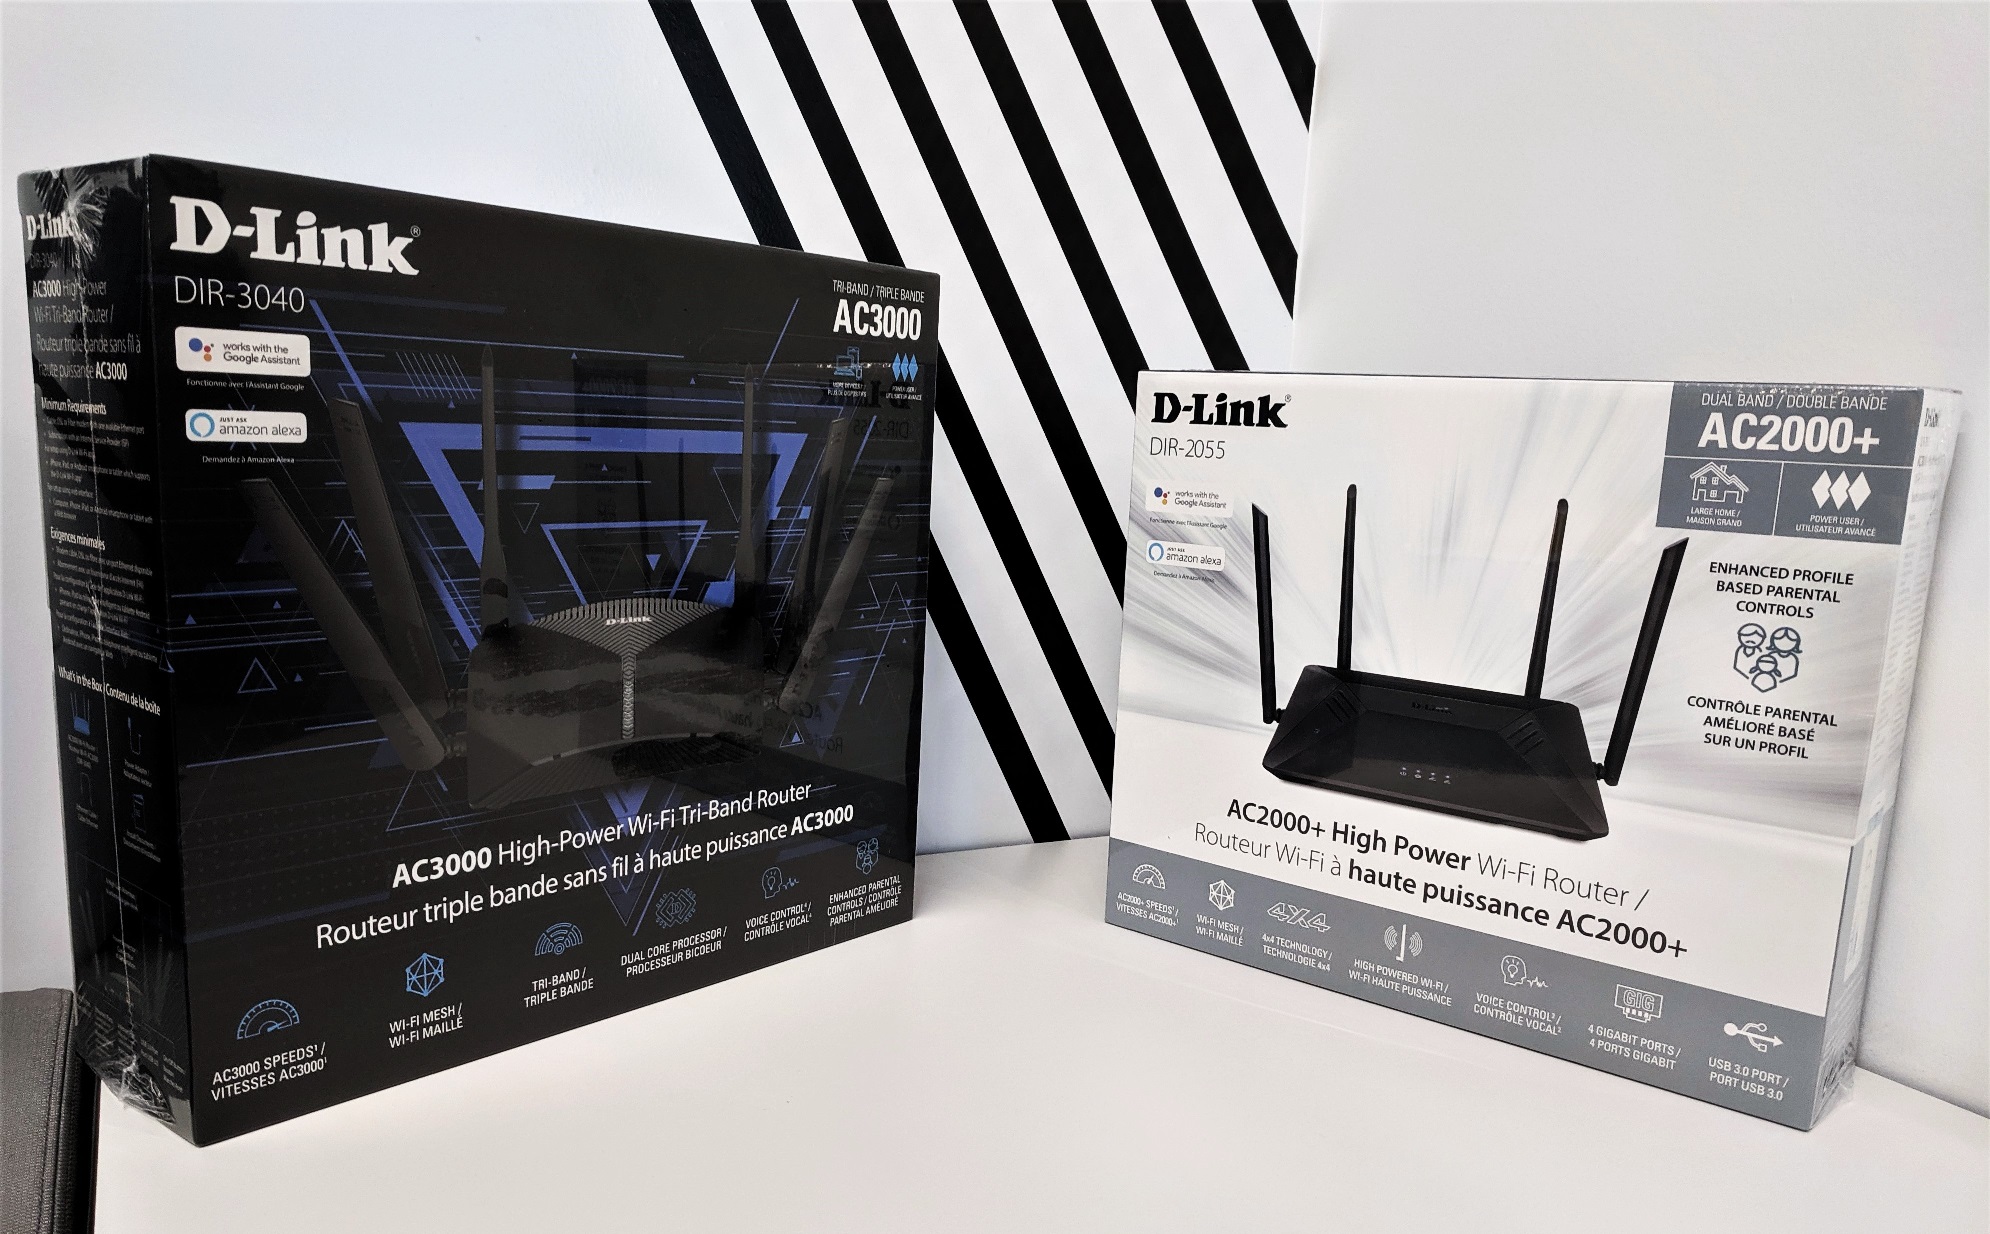 On the left is the D-Link AC3000 Wi-Fi router in its black box, on the right is the D-Link AC2000+ Wi-Fi router in its white box.